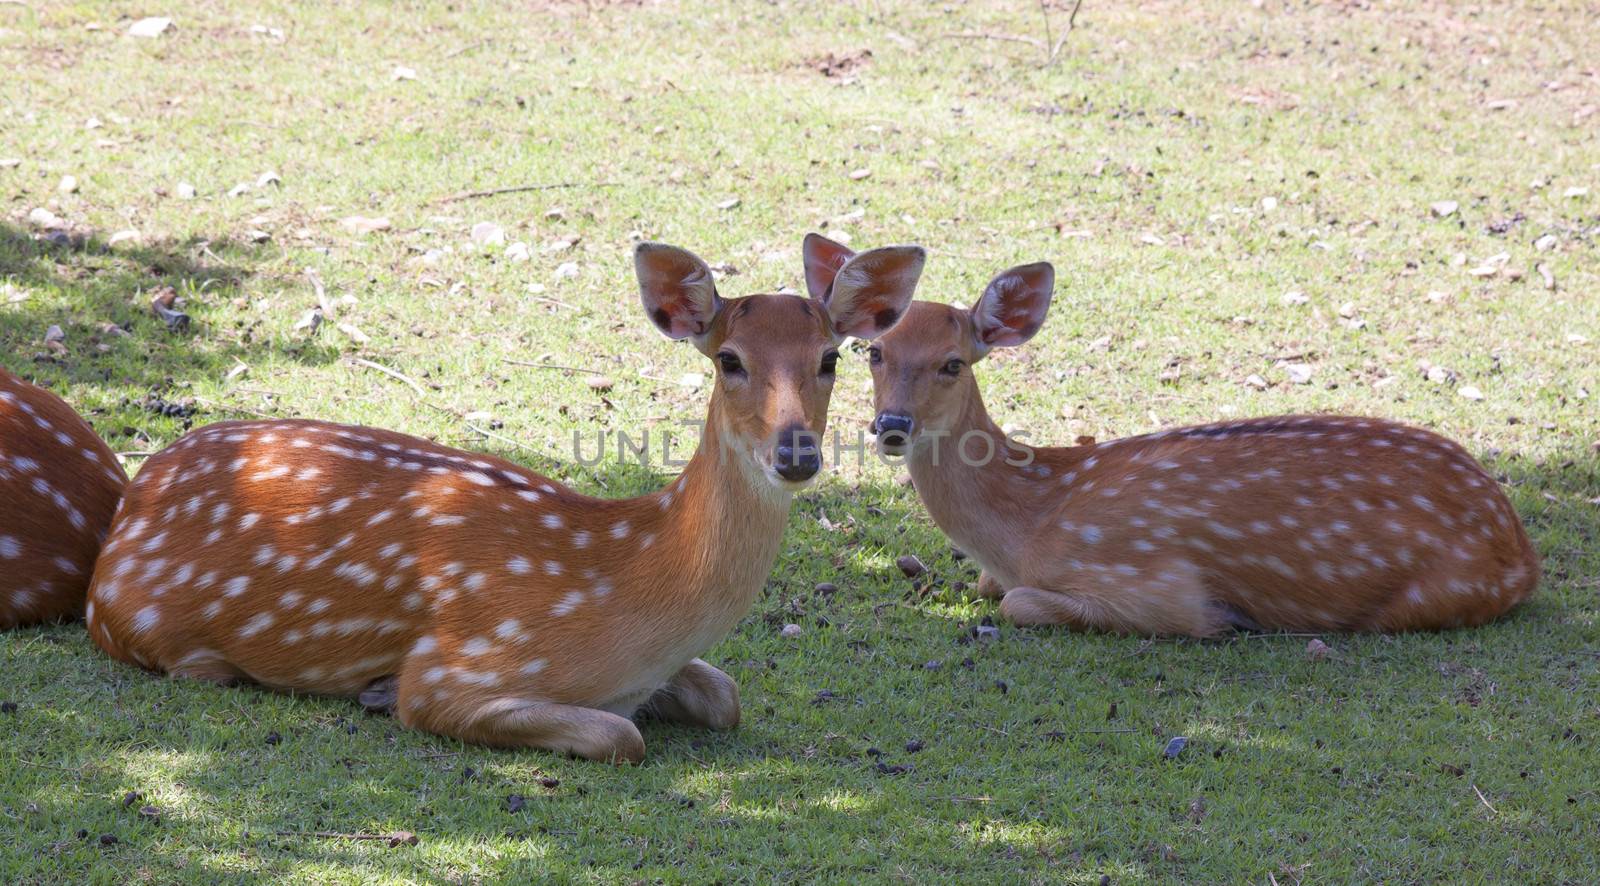 White Tailed Deer Wildlife Animals in Outdoors Nature